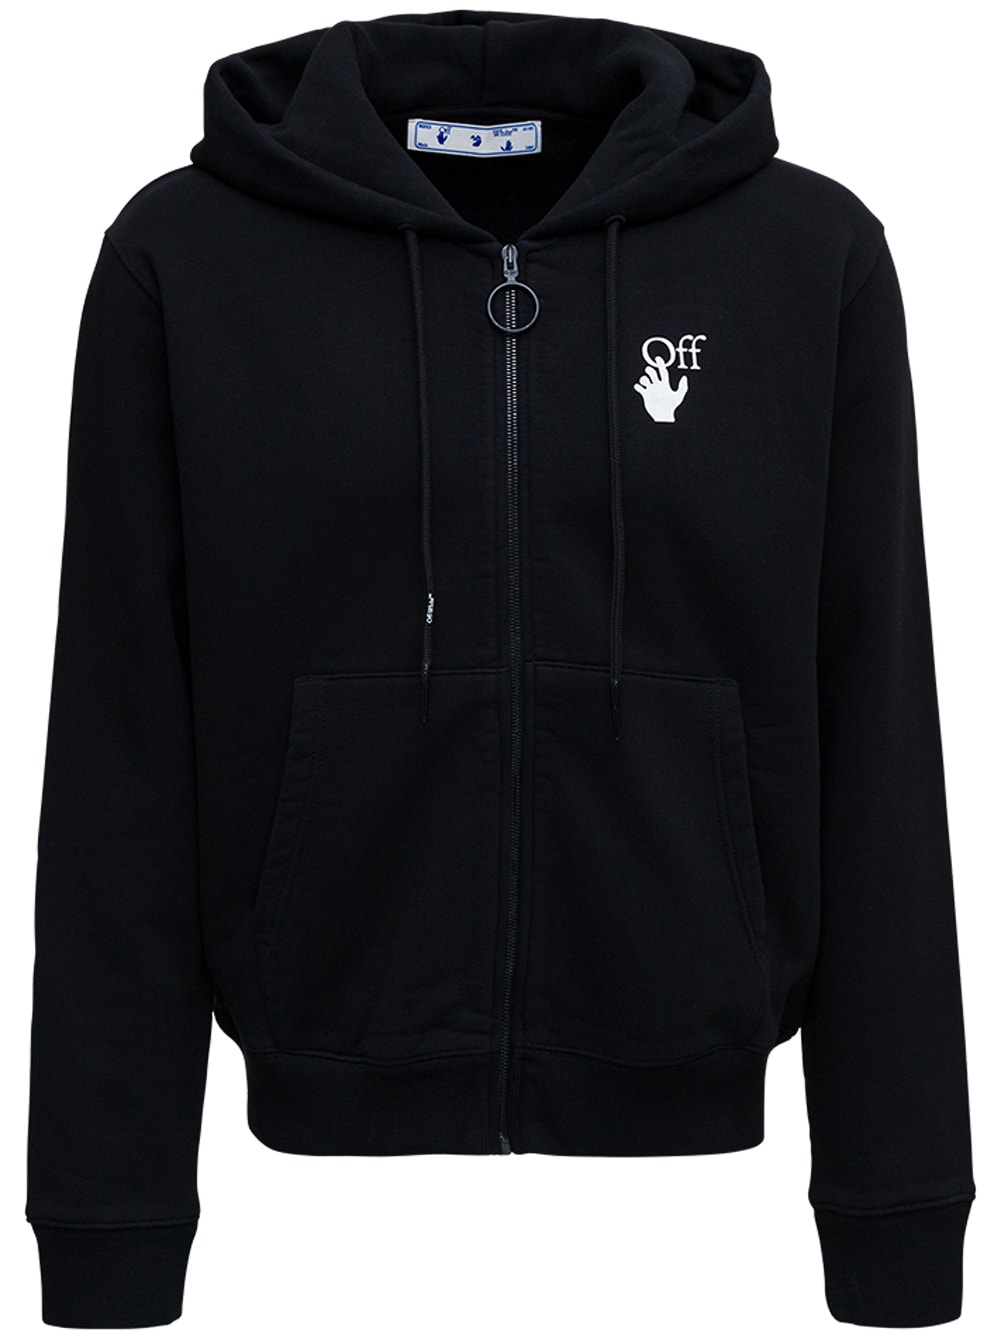 Off-White Black Cotton Hoodie With Degrade Arrow Print